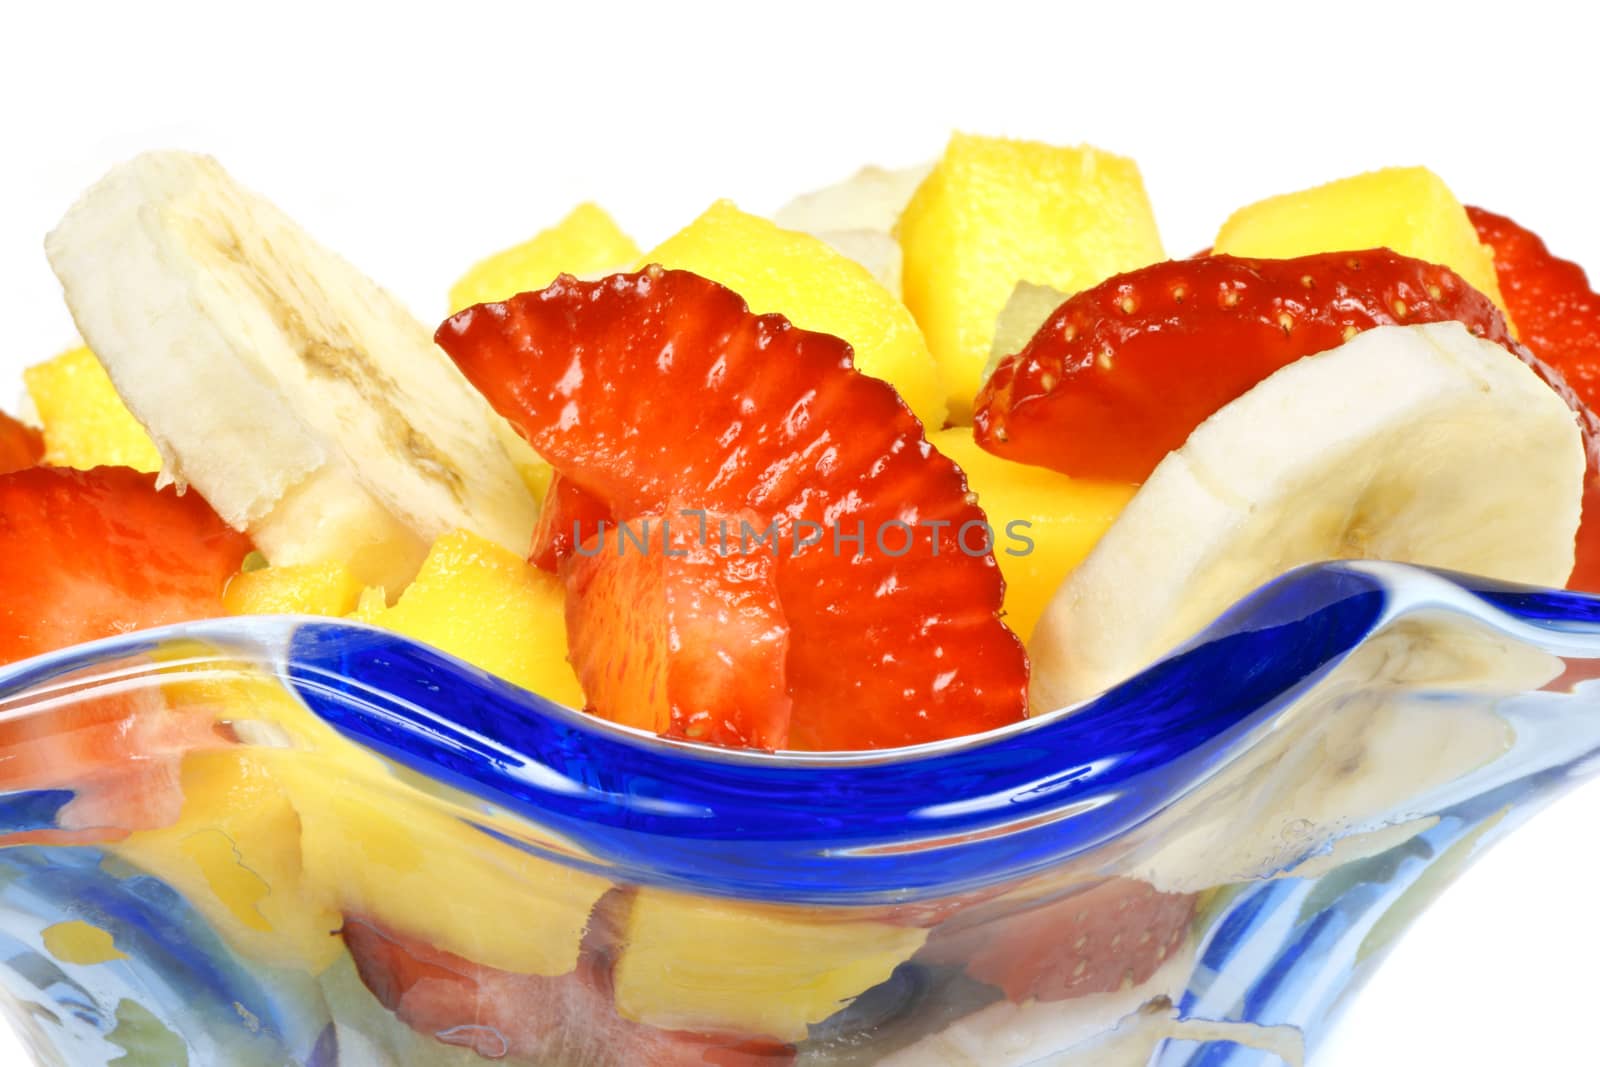 Close-up of a colorful fresh fruit salad in a blue glass cup.